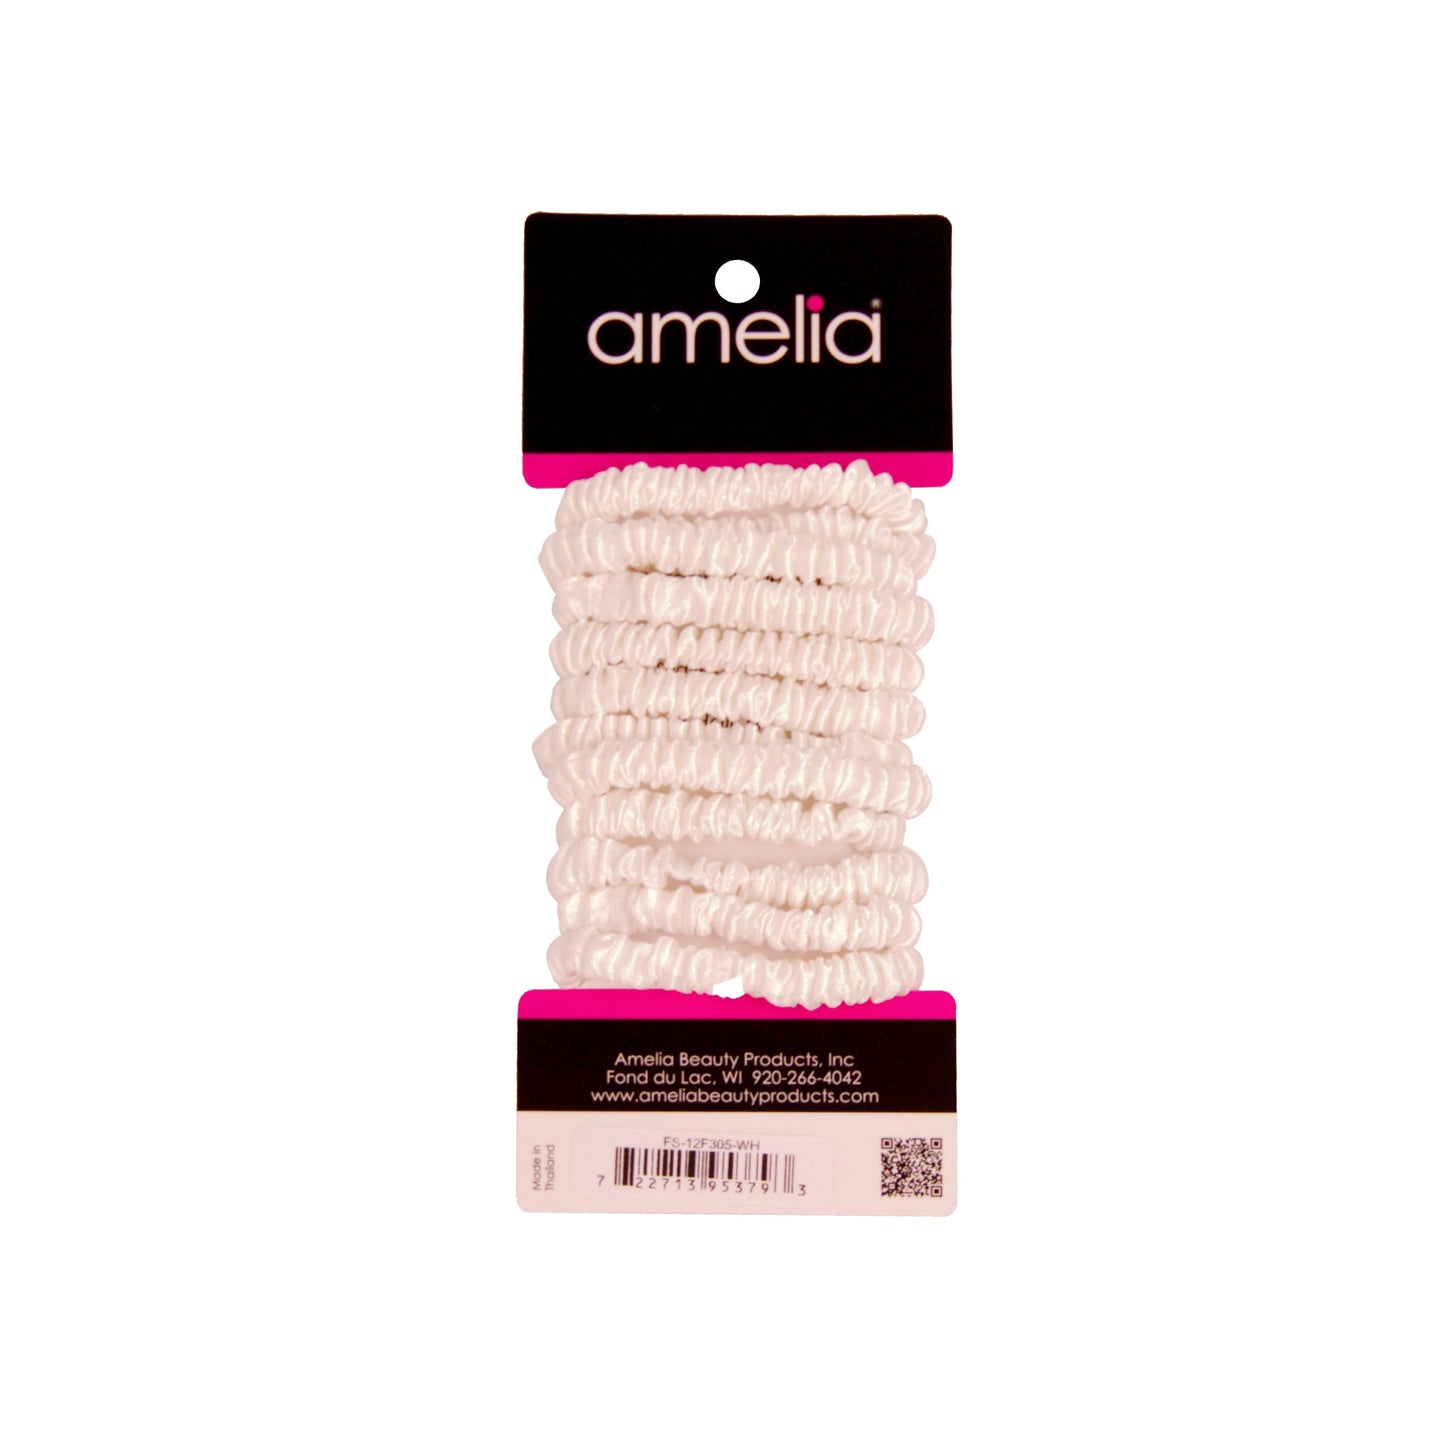 Amelia Beauty, White Skinny Satin Scrunchies, 2in Diameter, Gentle and Strong Hold, No Snag, No Dents or Creases. 12 Pack - 12 Retail Packs